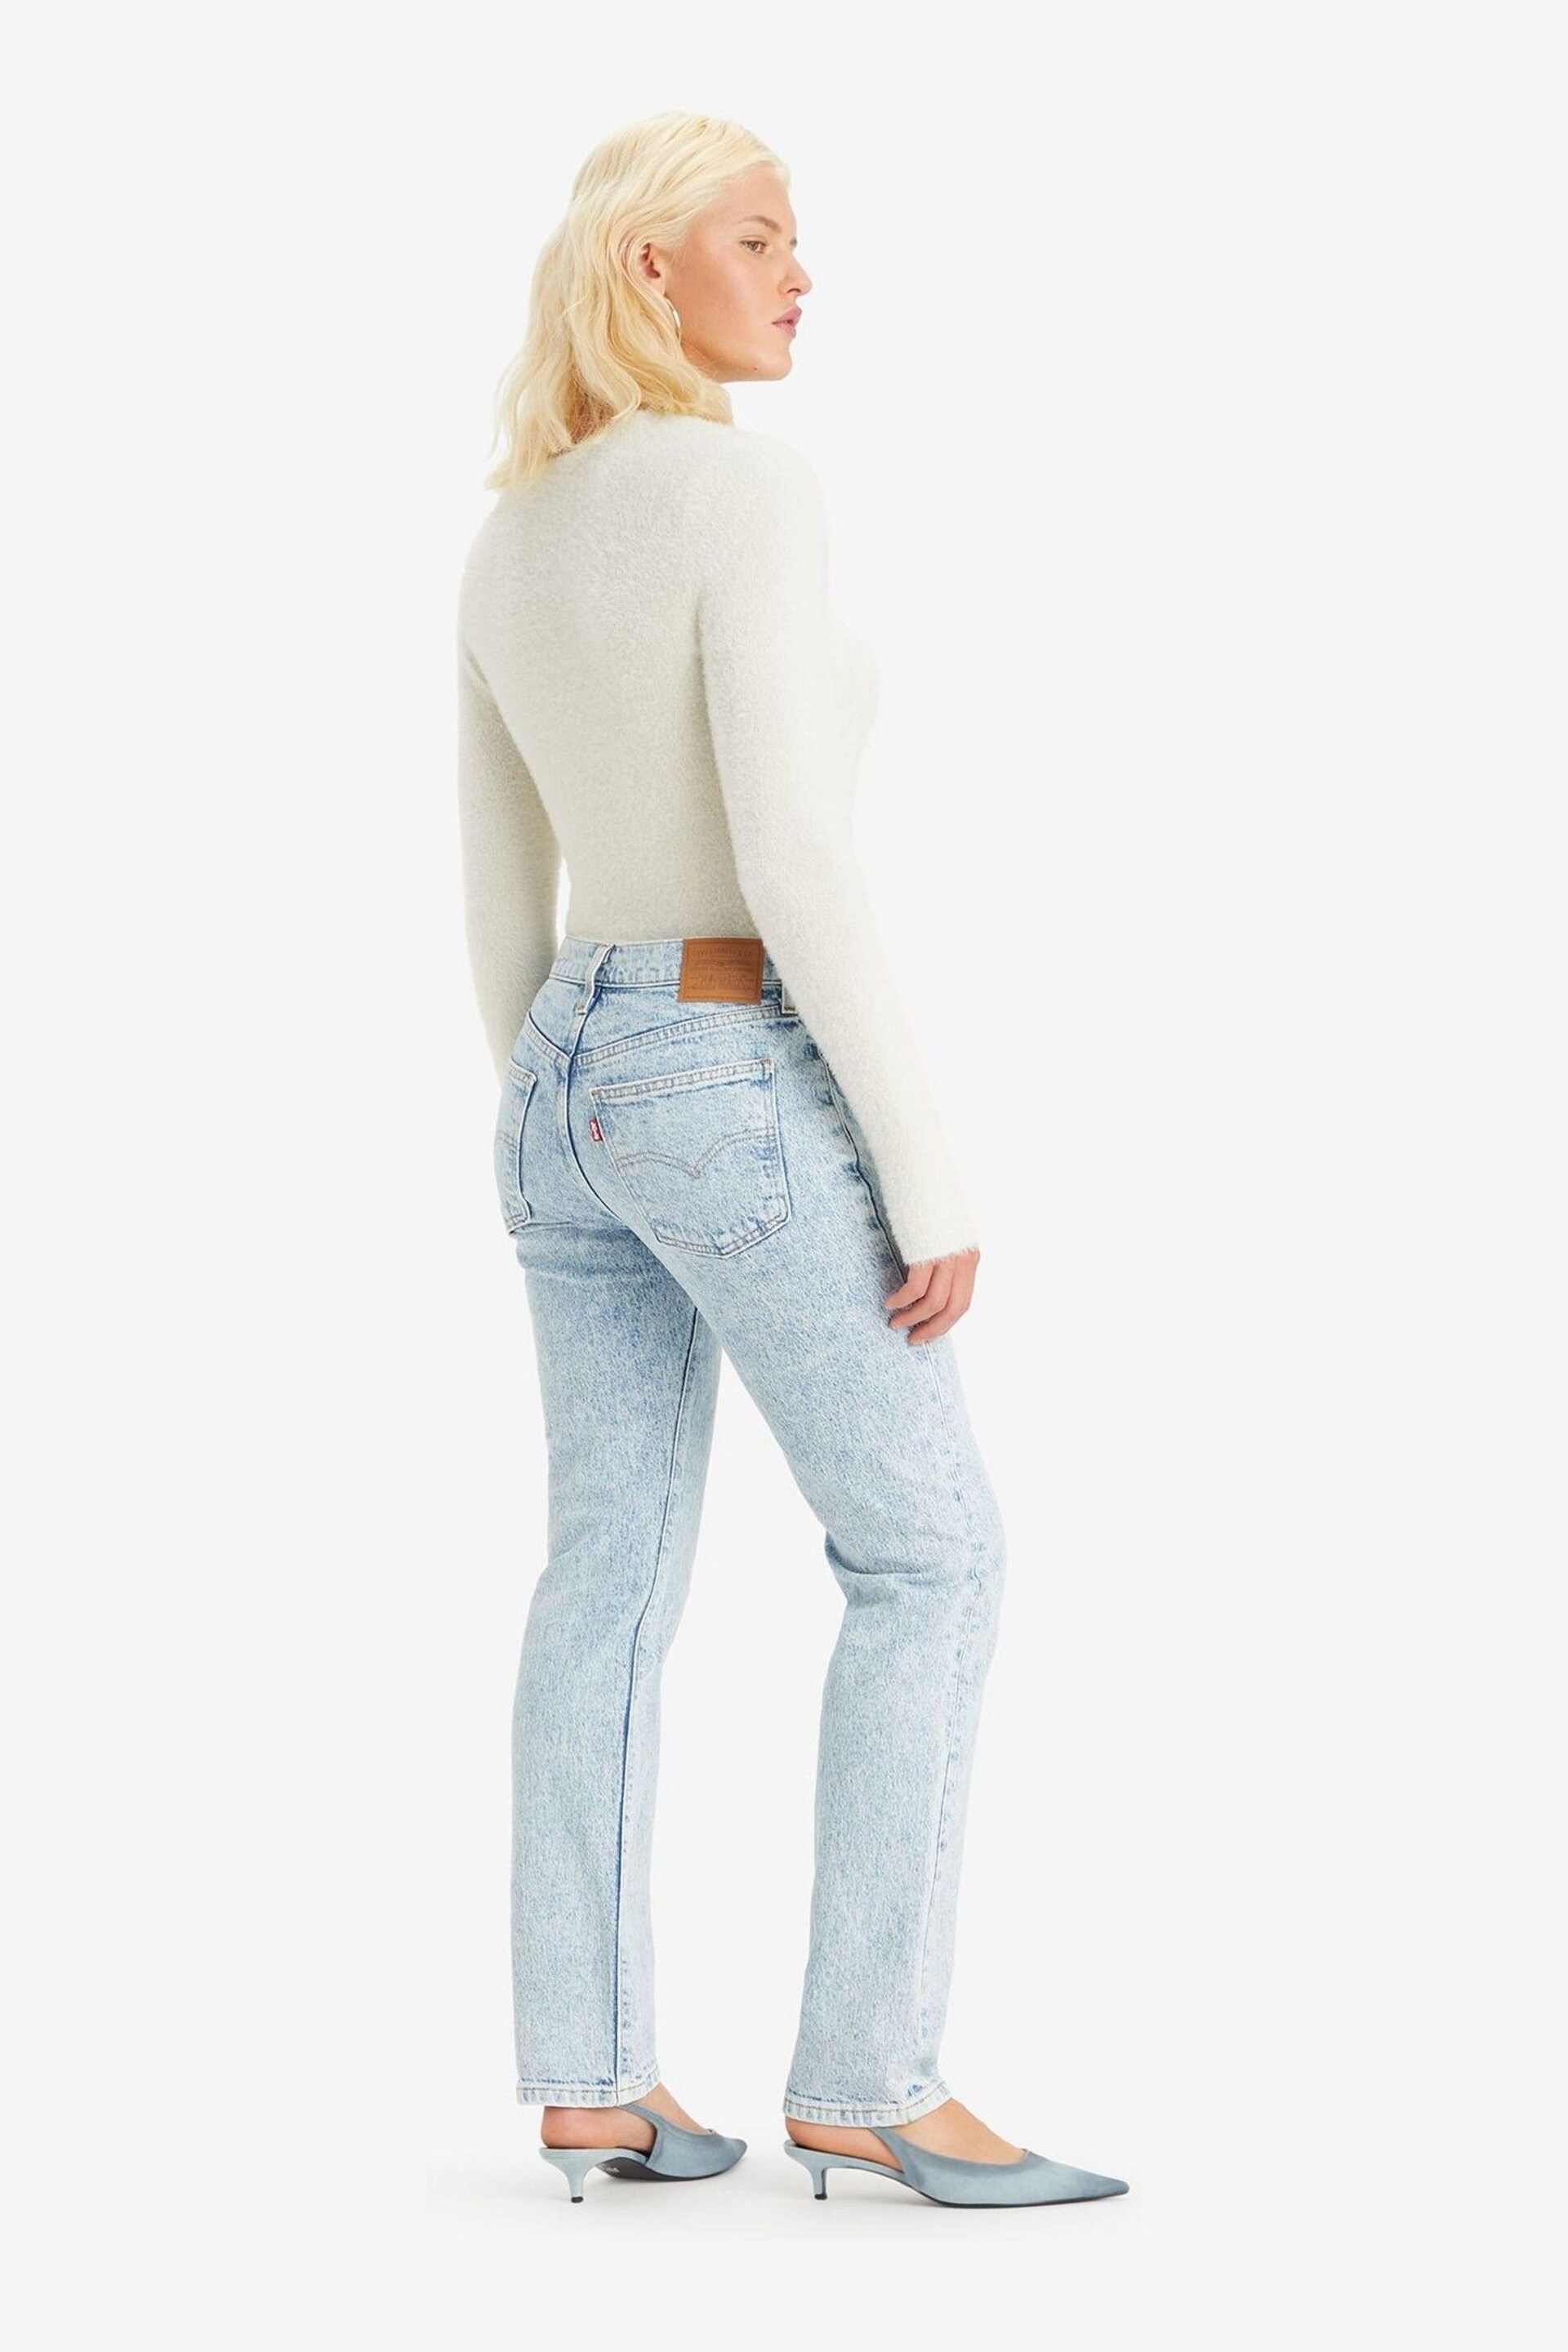 Levi's® That’s Fashion Middy Straight Jeans - Image 4 of 7